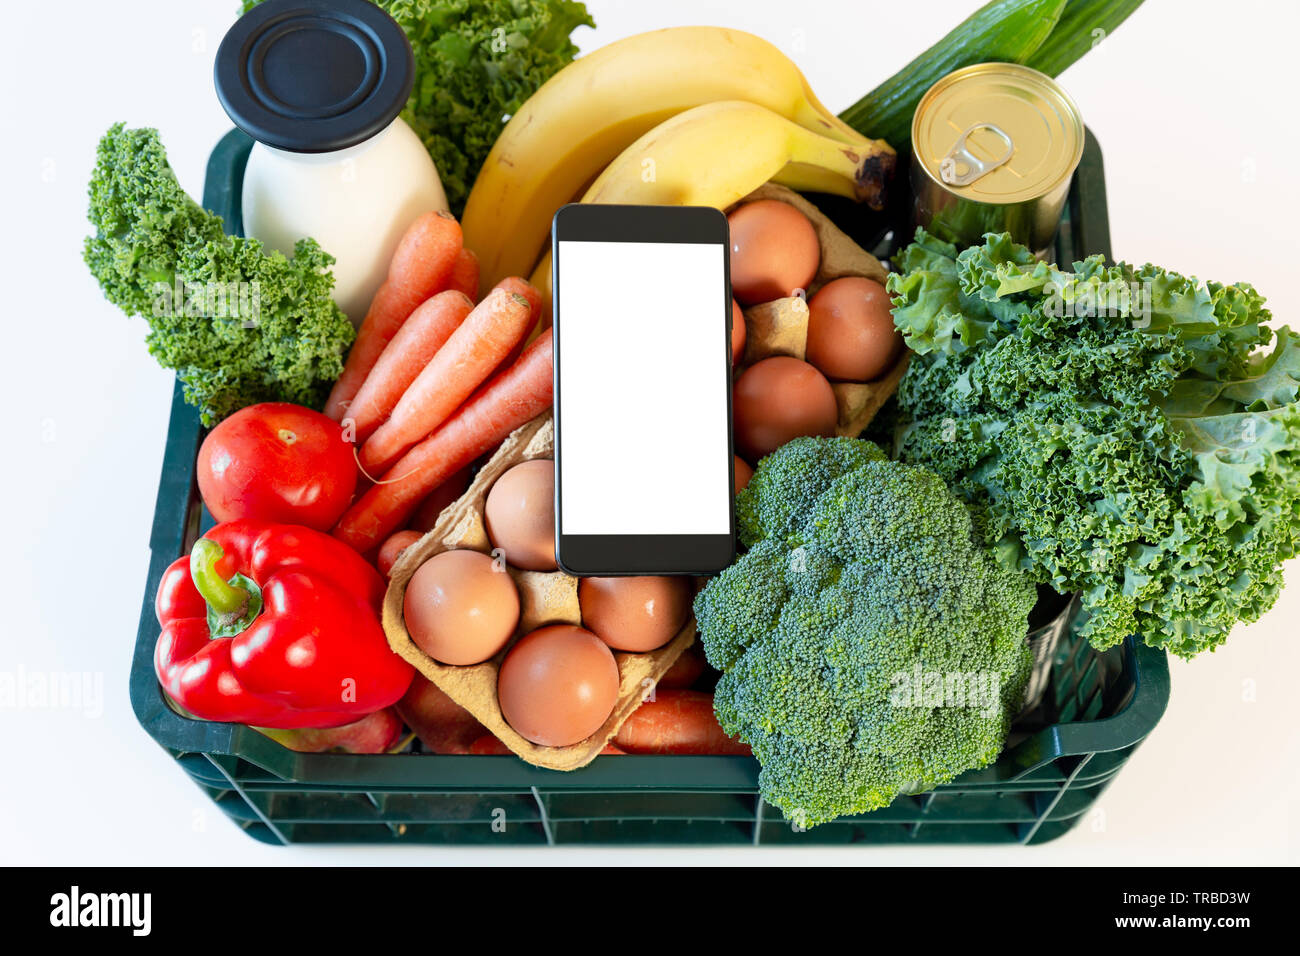 Food delivery service - smartphone on the box of groceries Stock Photo